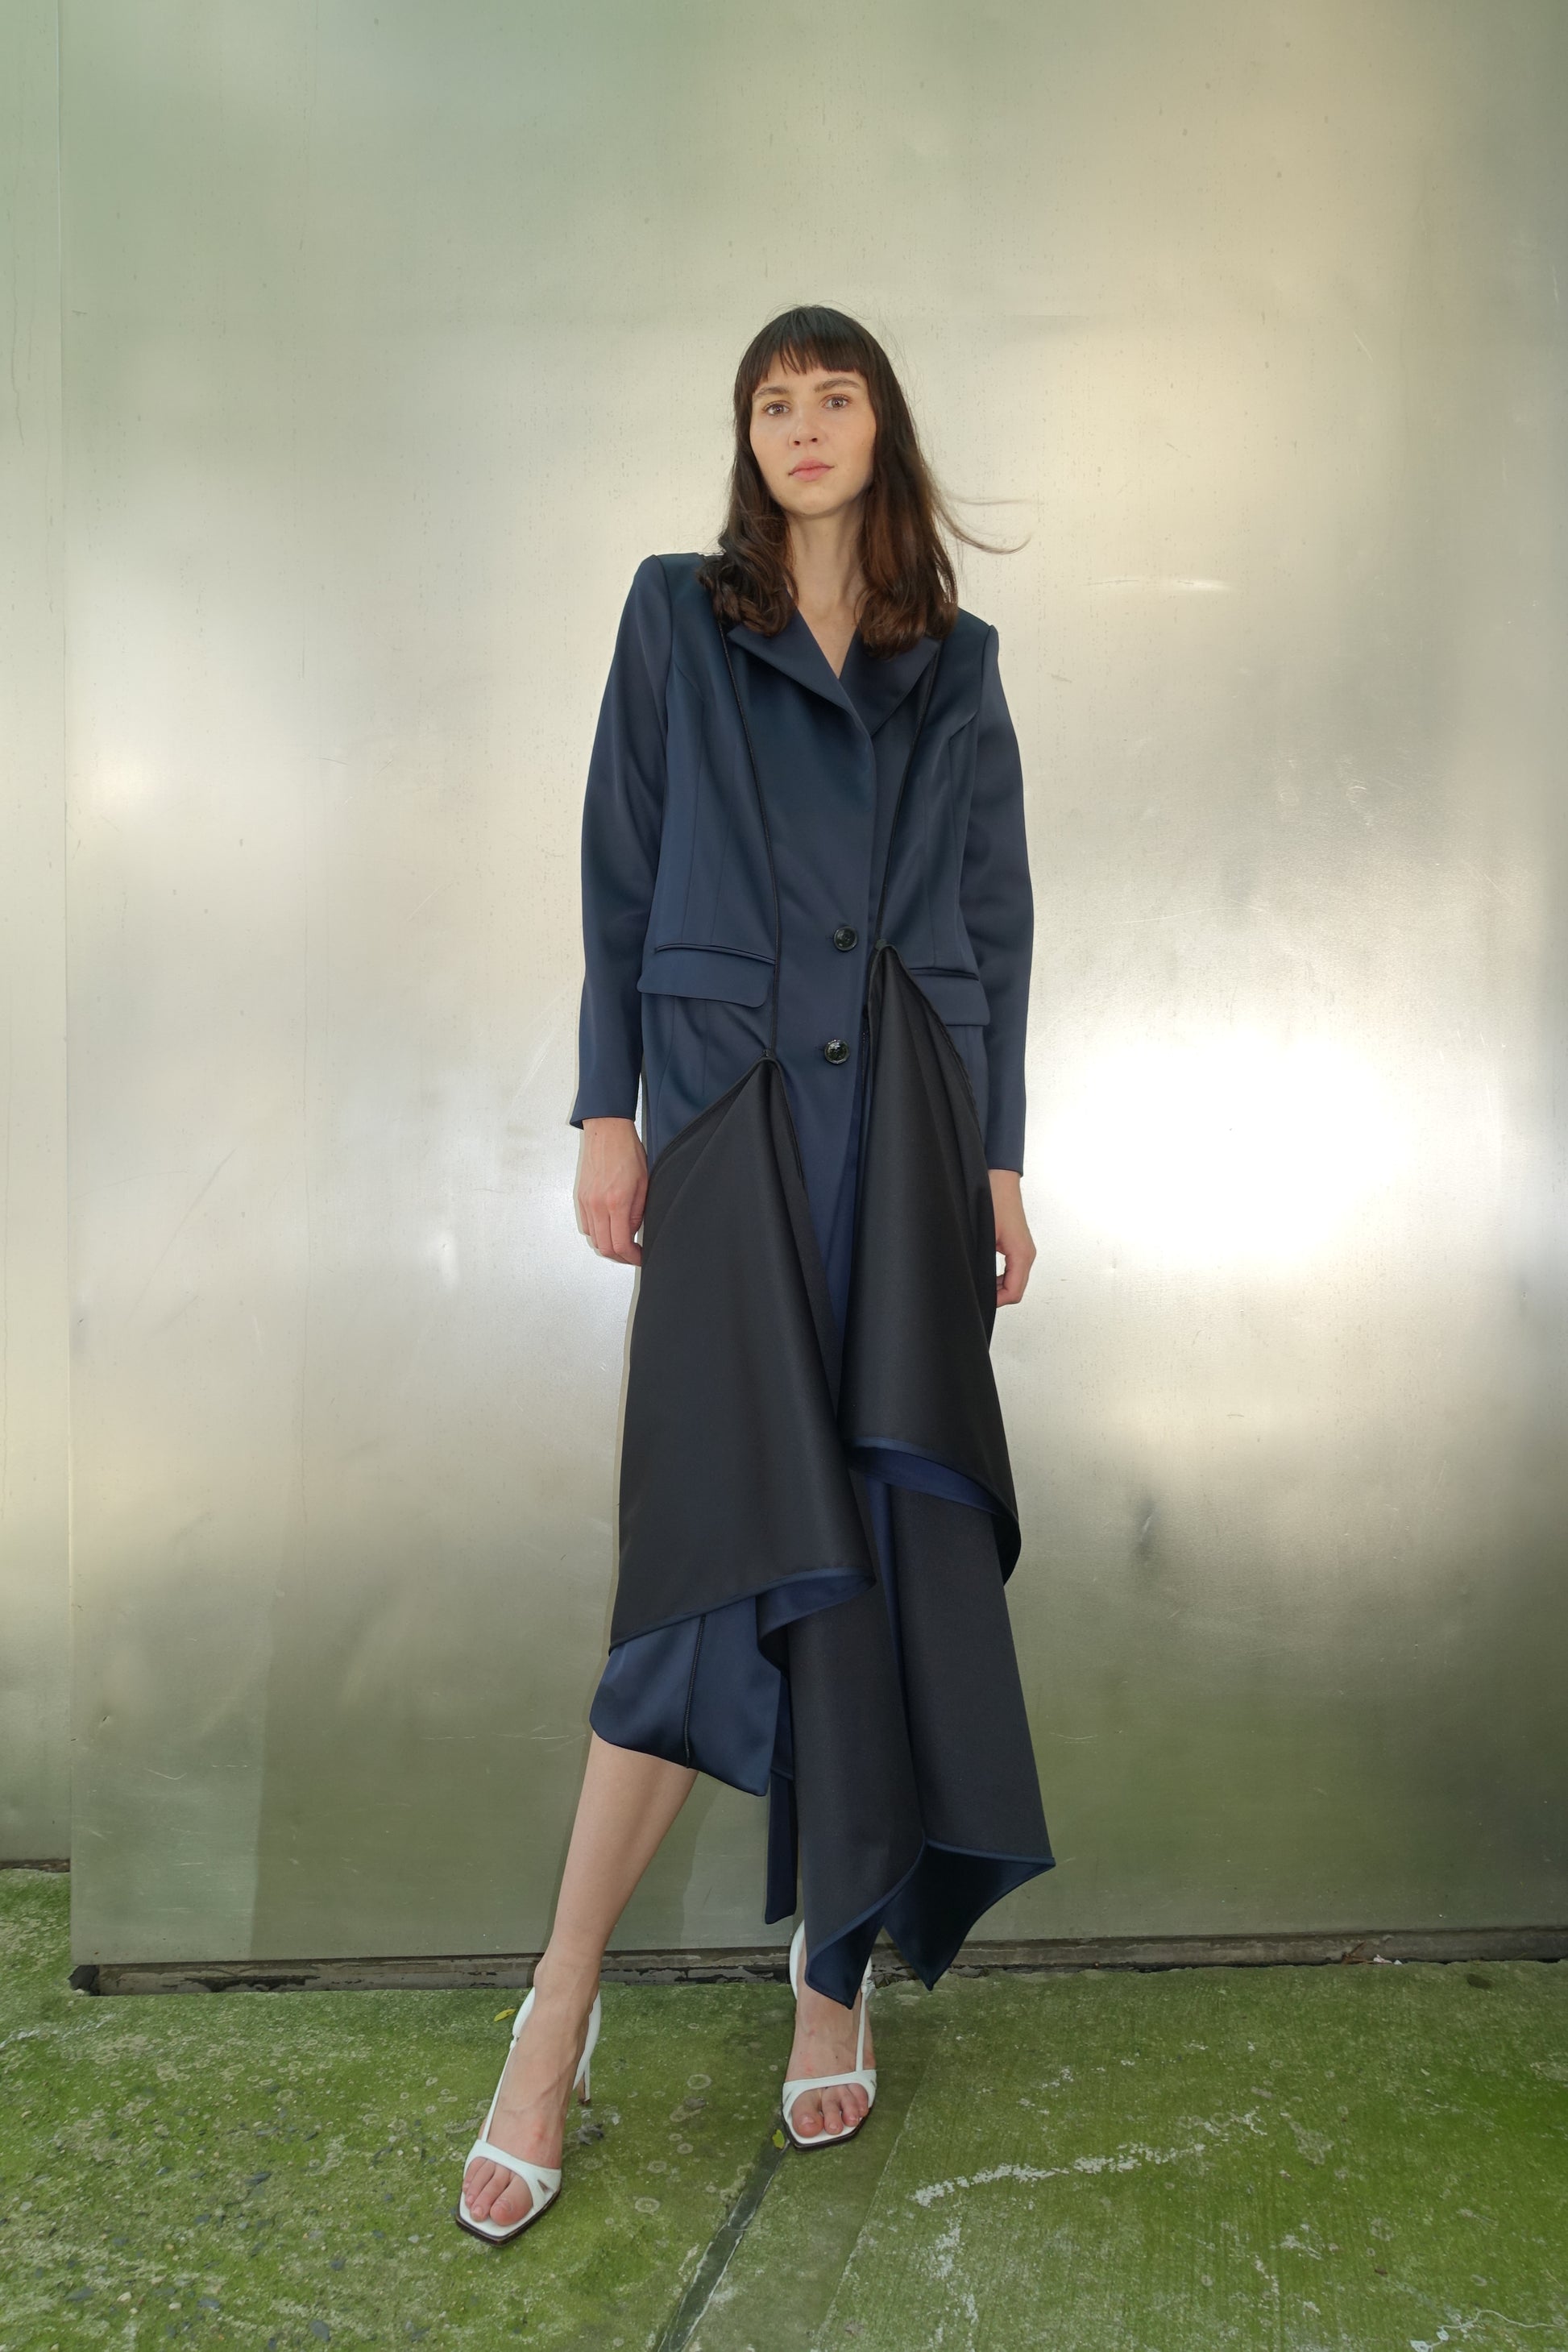 Woman wearing navy navy stretch satin coat with transformable zippers and self tie belt with draped detail on the lower side of her body